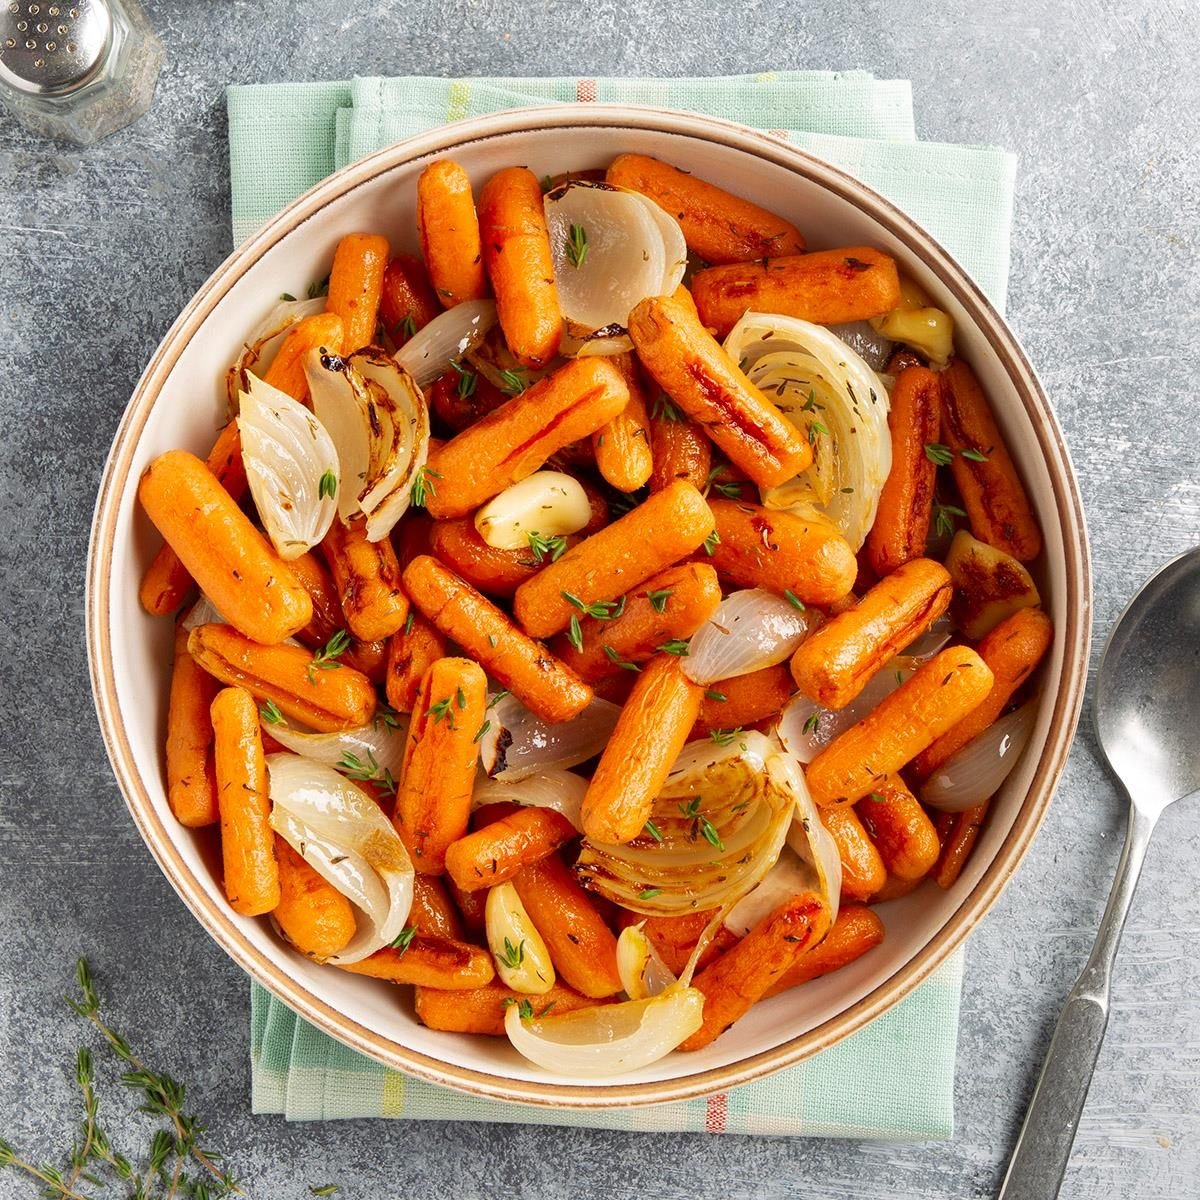 Oven Roasted Carrots Exps Ft21  16093 F 0902 1 14